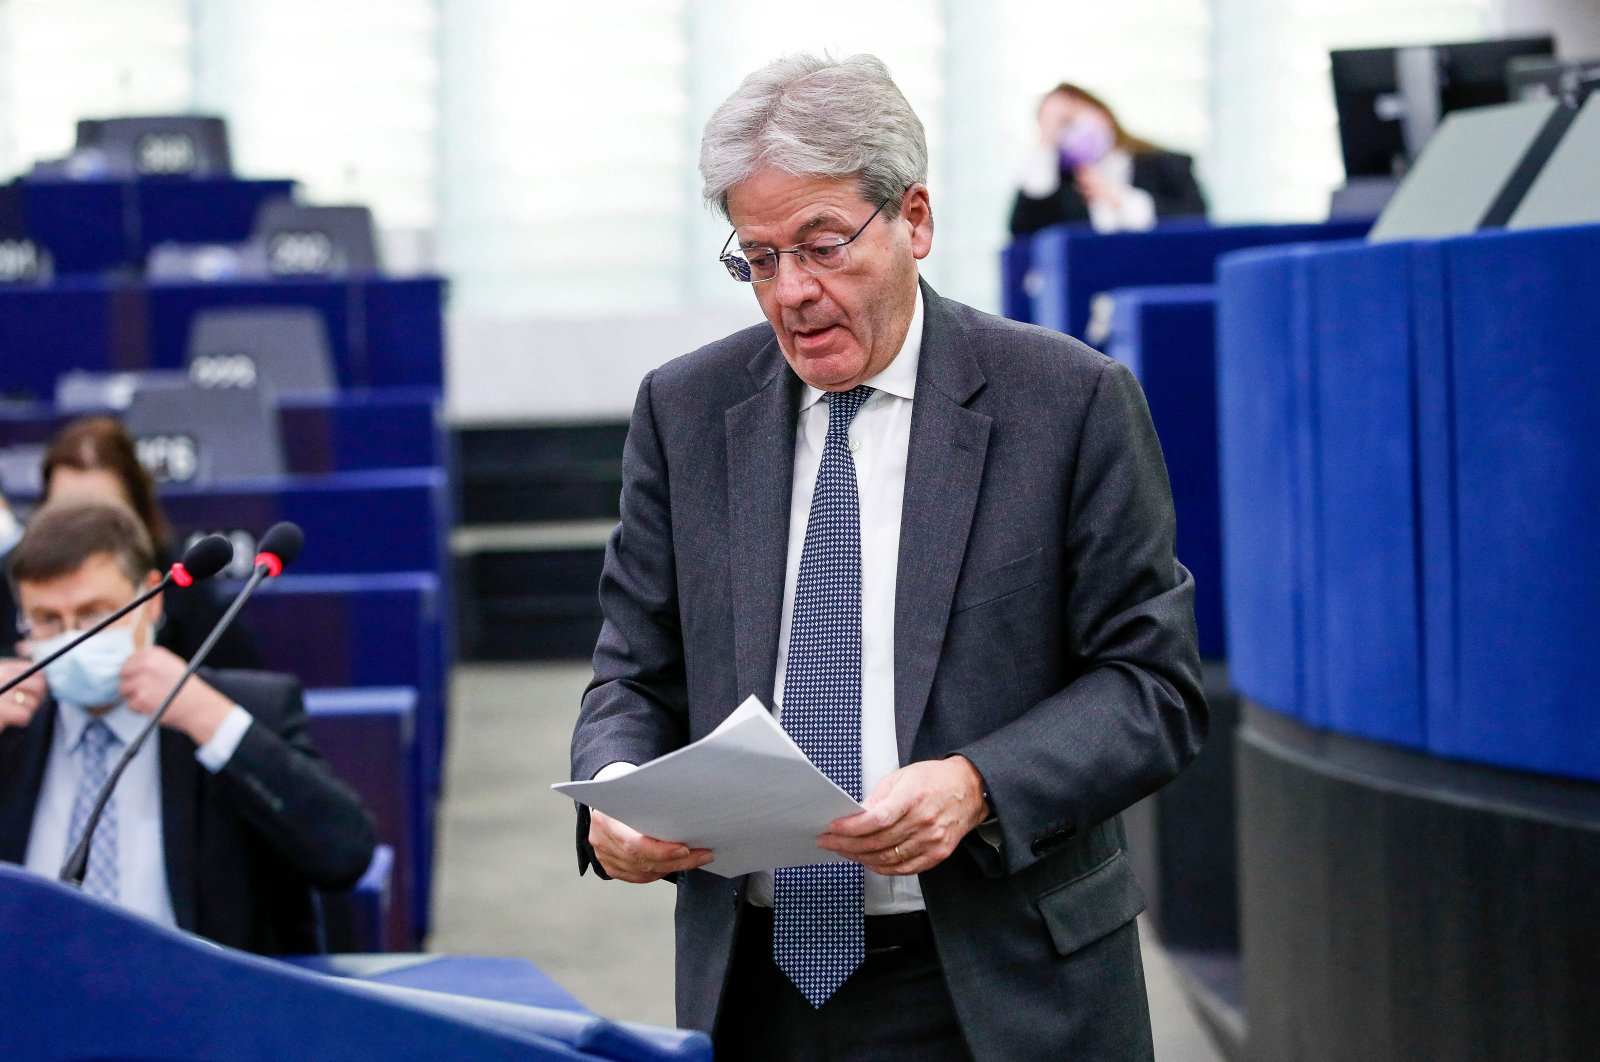 EU Commissioner for Economy Paolo Gentiloni delivers a speech on the state of play of the Recovery and Resilience Facility (RRF) during a plenary session of the European Parliament, in Strasbourg, eastern France, Dec. 15, 2021. (AFP Photo)